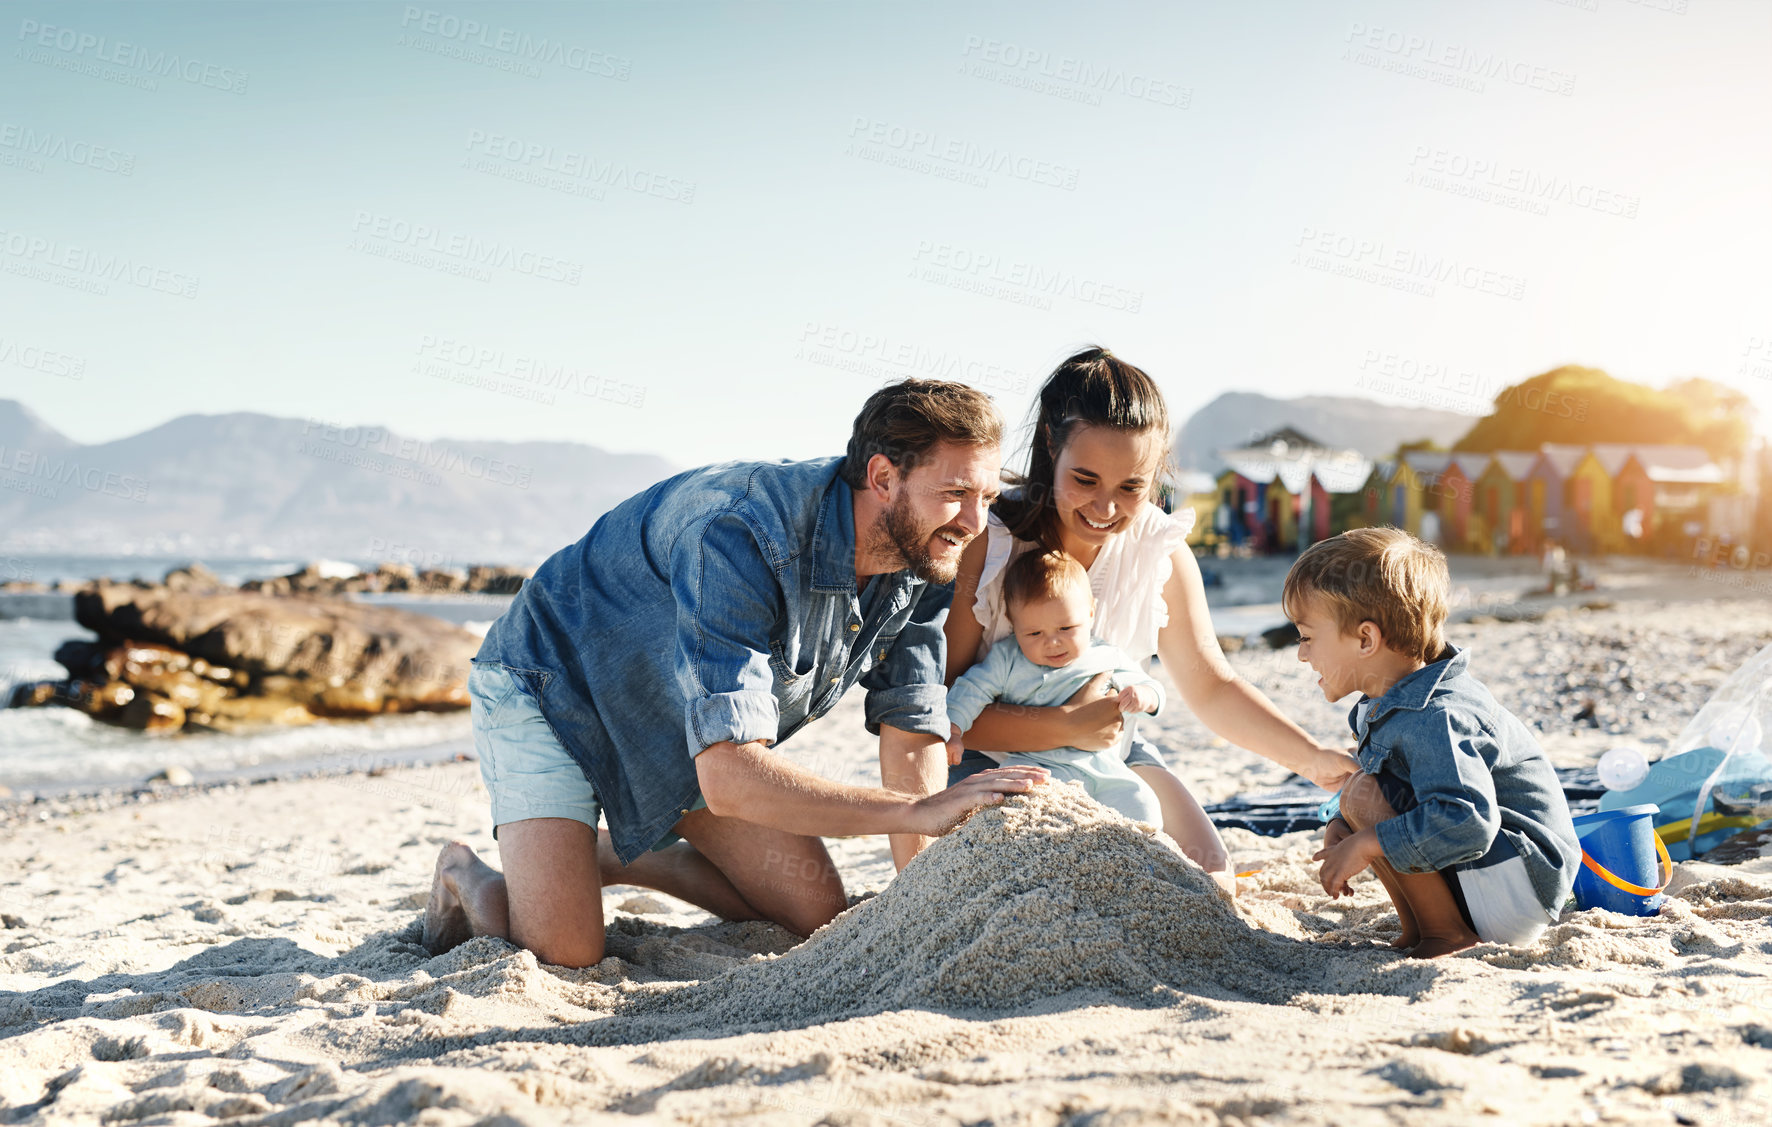 Buy stock photo Sandcastle fun, parents and children at the beach with bonding, love and support. Baby, mom and dad together with kids playing in the sun with happiness and smile by the ocean and sea with family